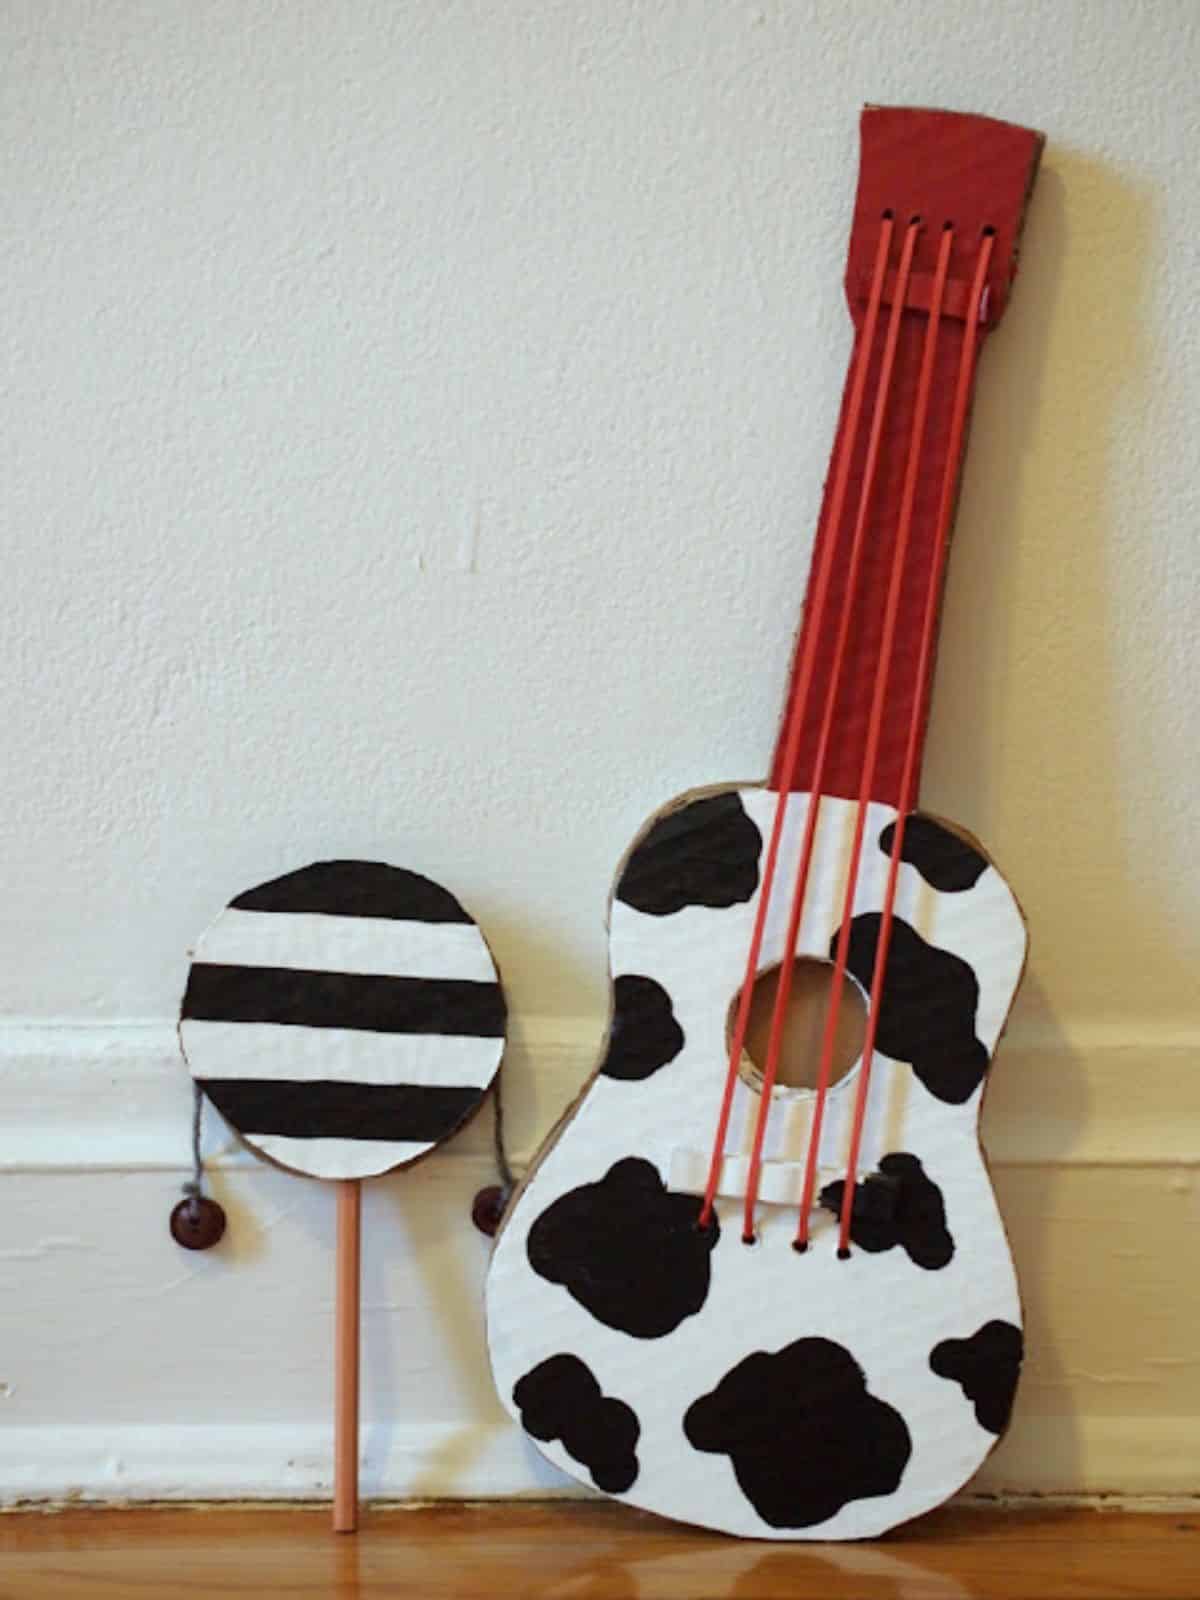 Cow themed cardboard guitar leaning on a wall.